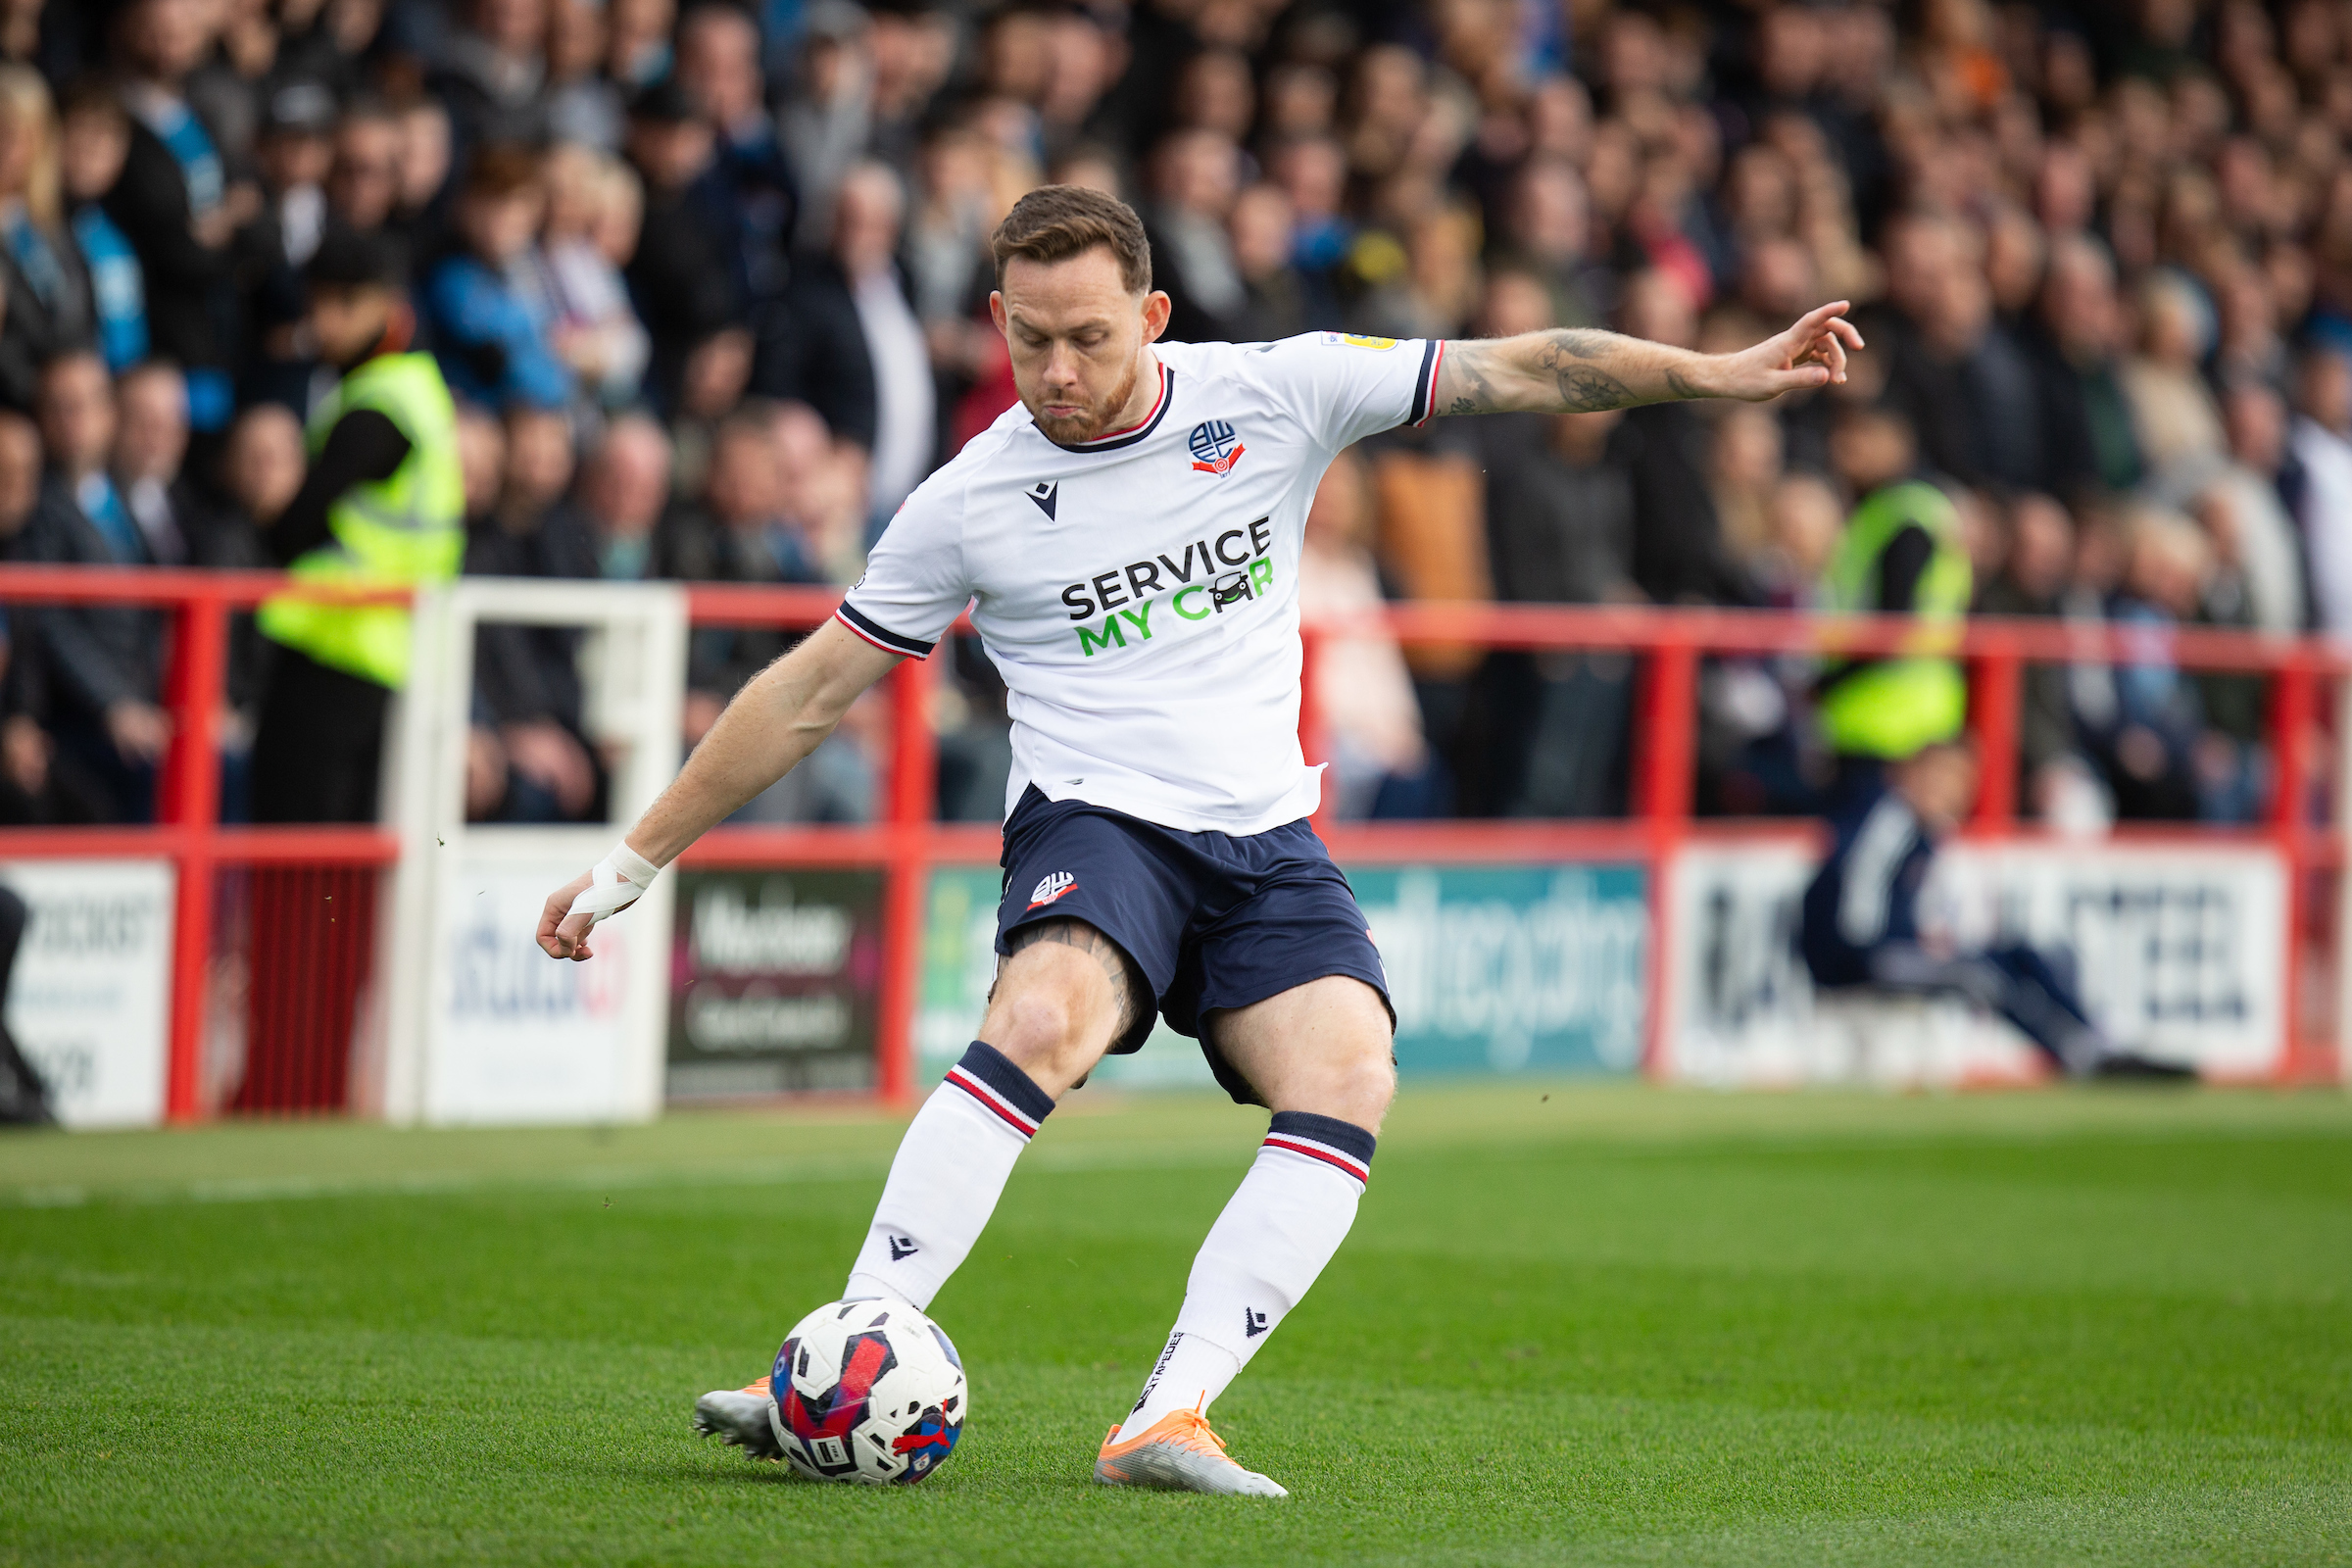 Bolton Wanderers: Gethin Jones' message to fans after injury